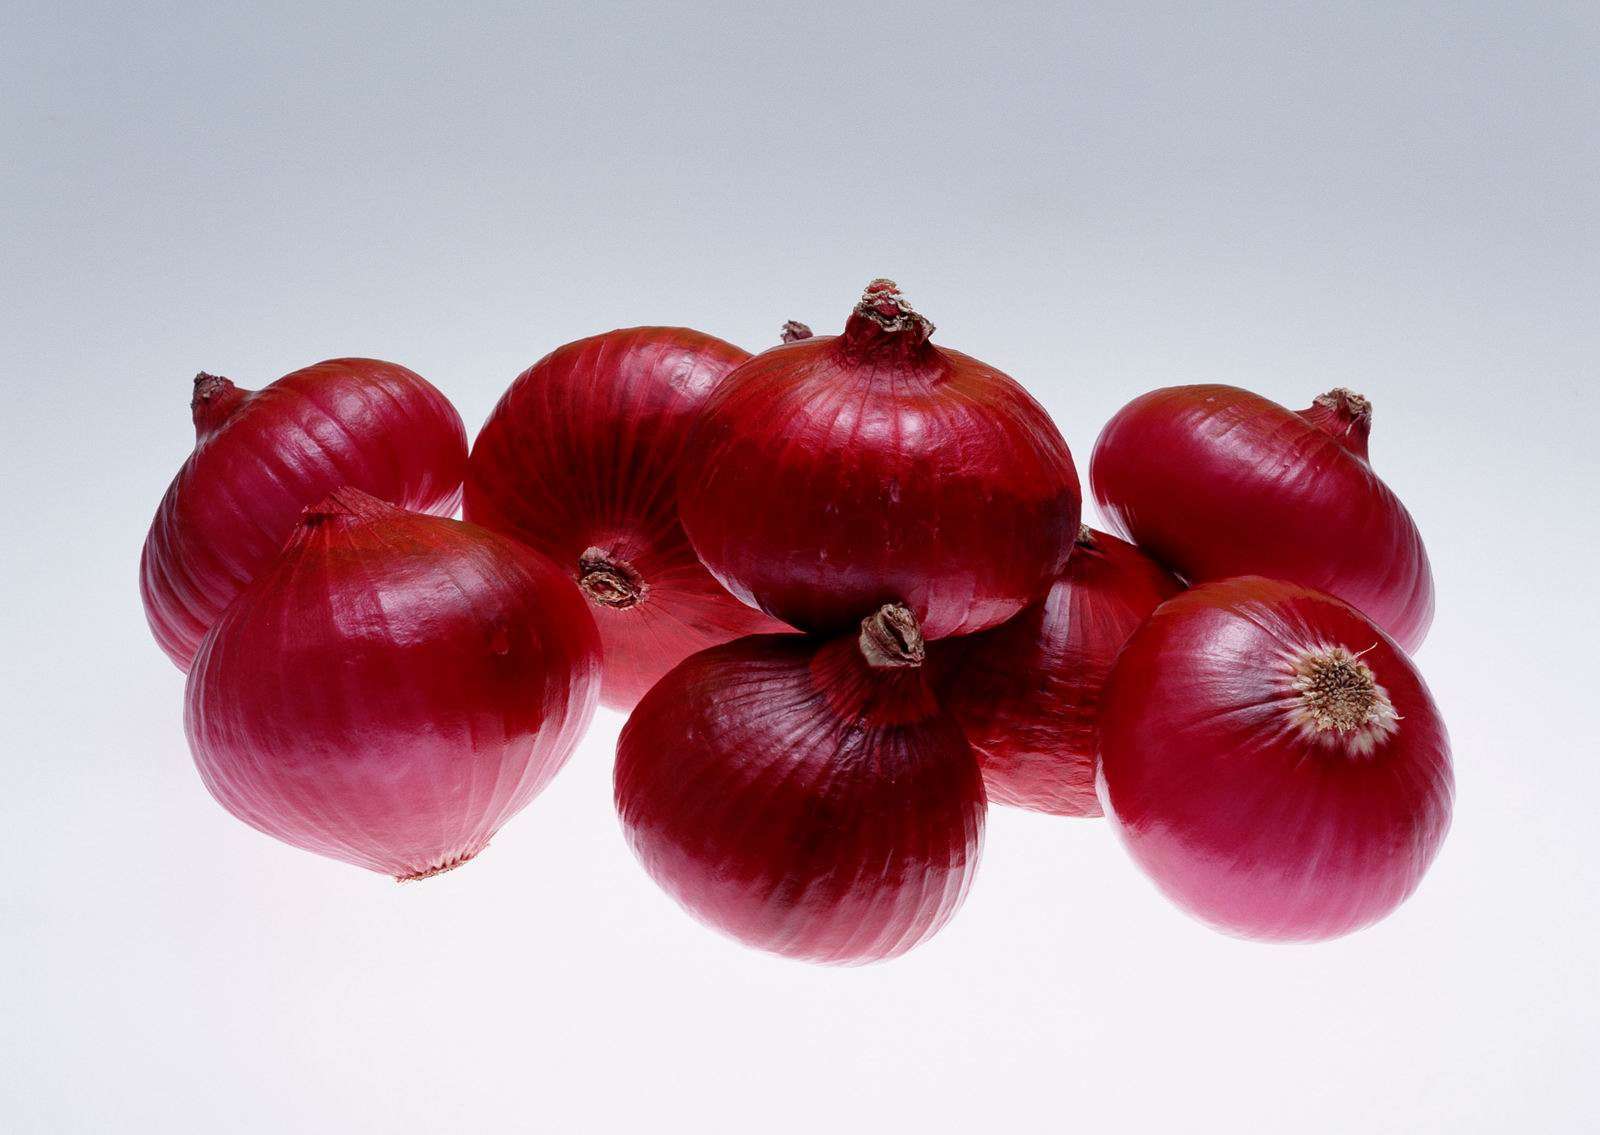 Onion Wallpaper, Onion Wallpaper and Picture Collection